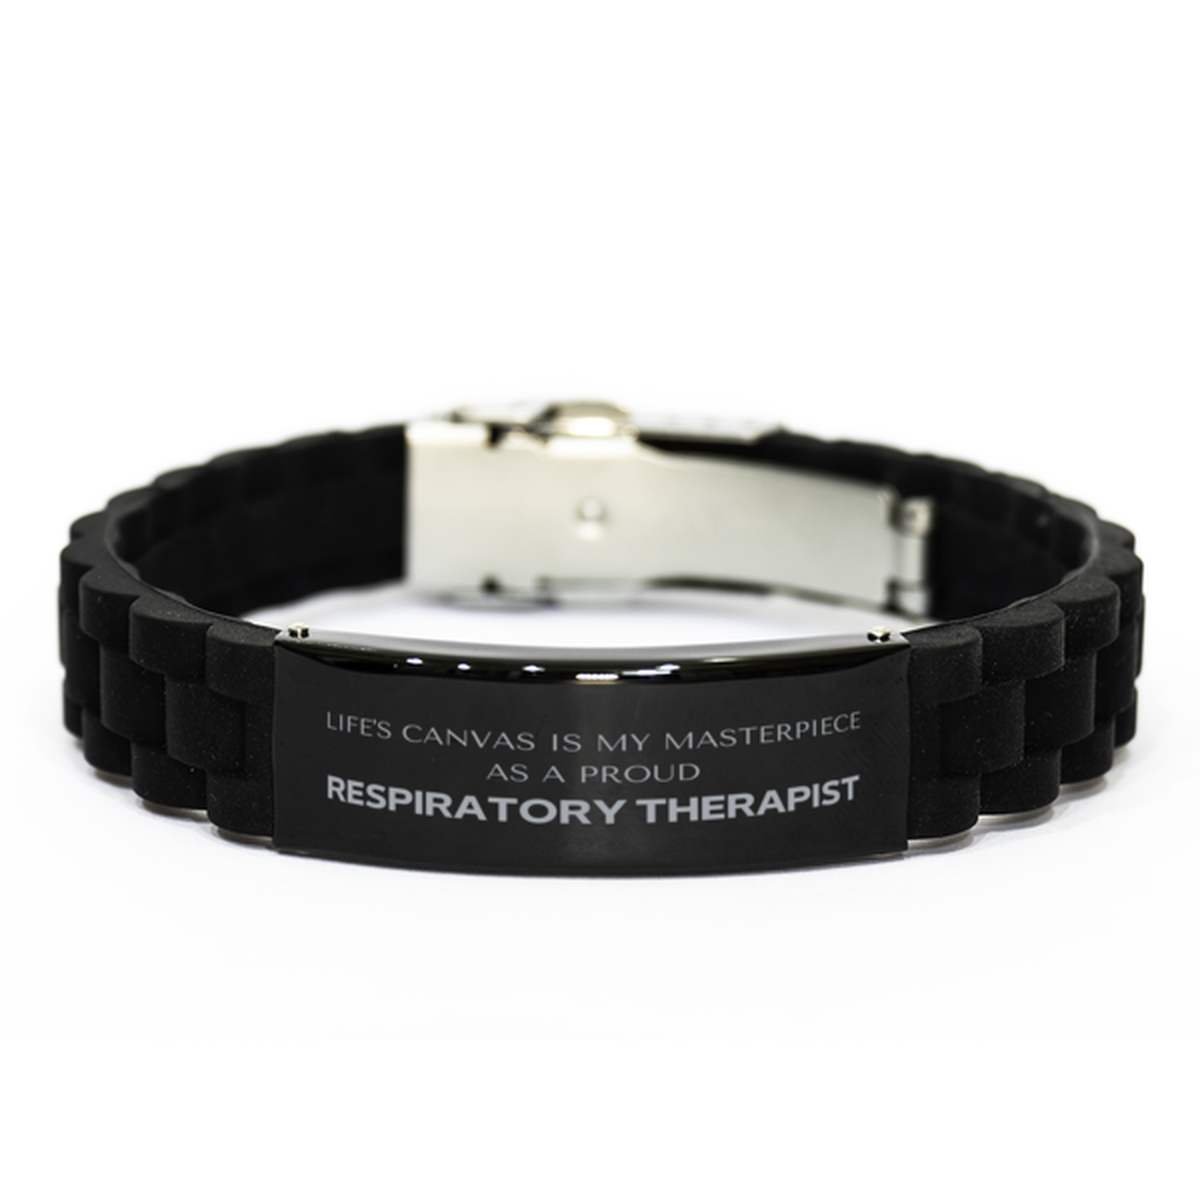 Proud Respiratory Therapist Gifts, Life's canvas is my masterpiece, Epic Birthday Christmas Unique Black Glidelock Clasp Bracelet For Respiratory Therapist, Coworkers, Men, Women, Friends